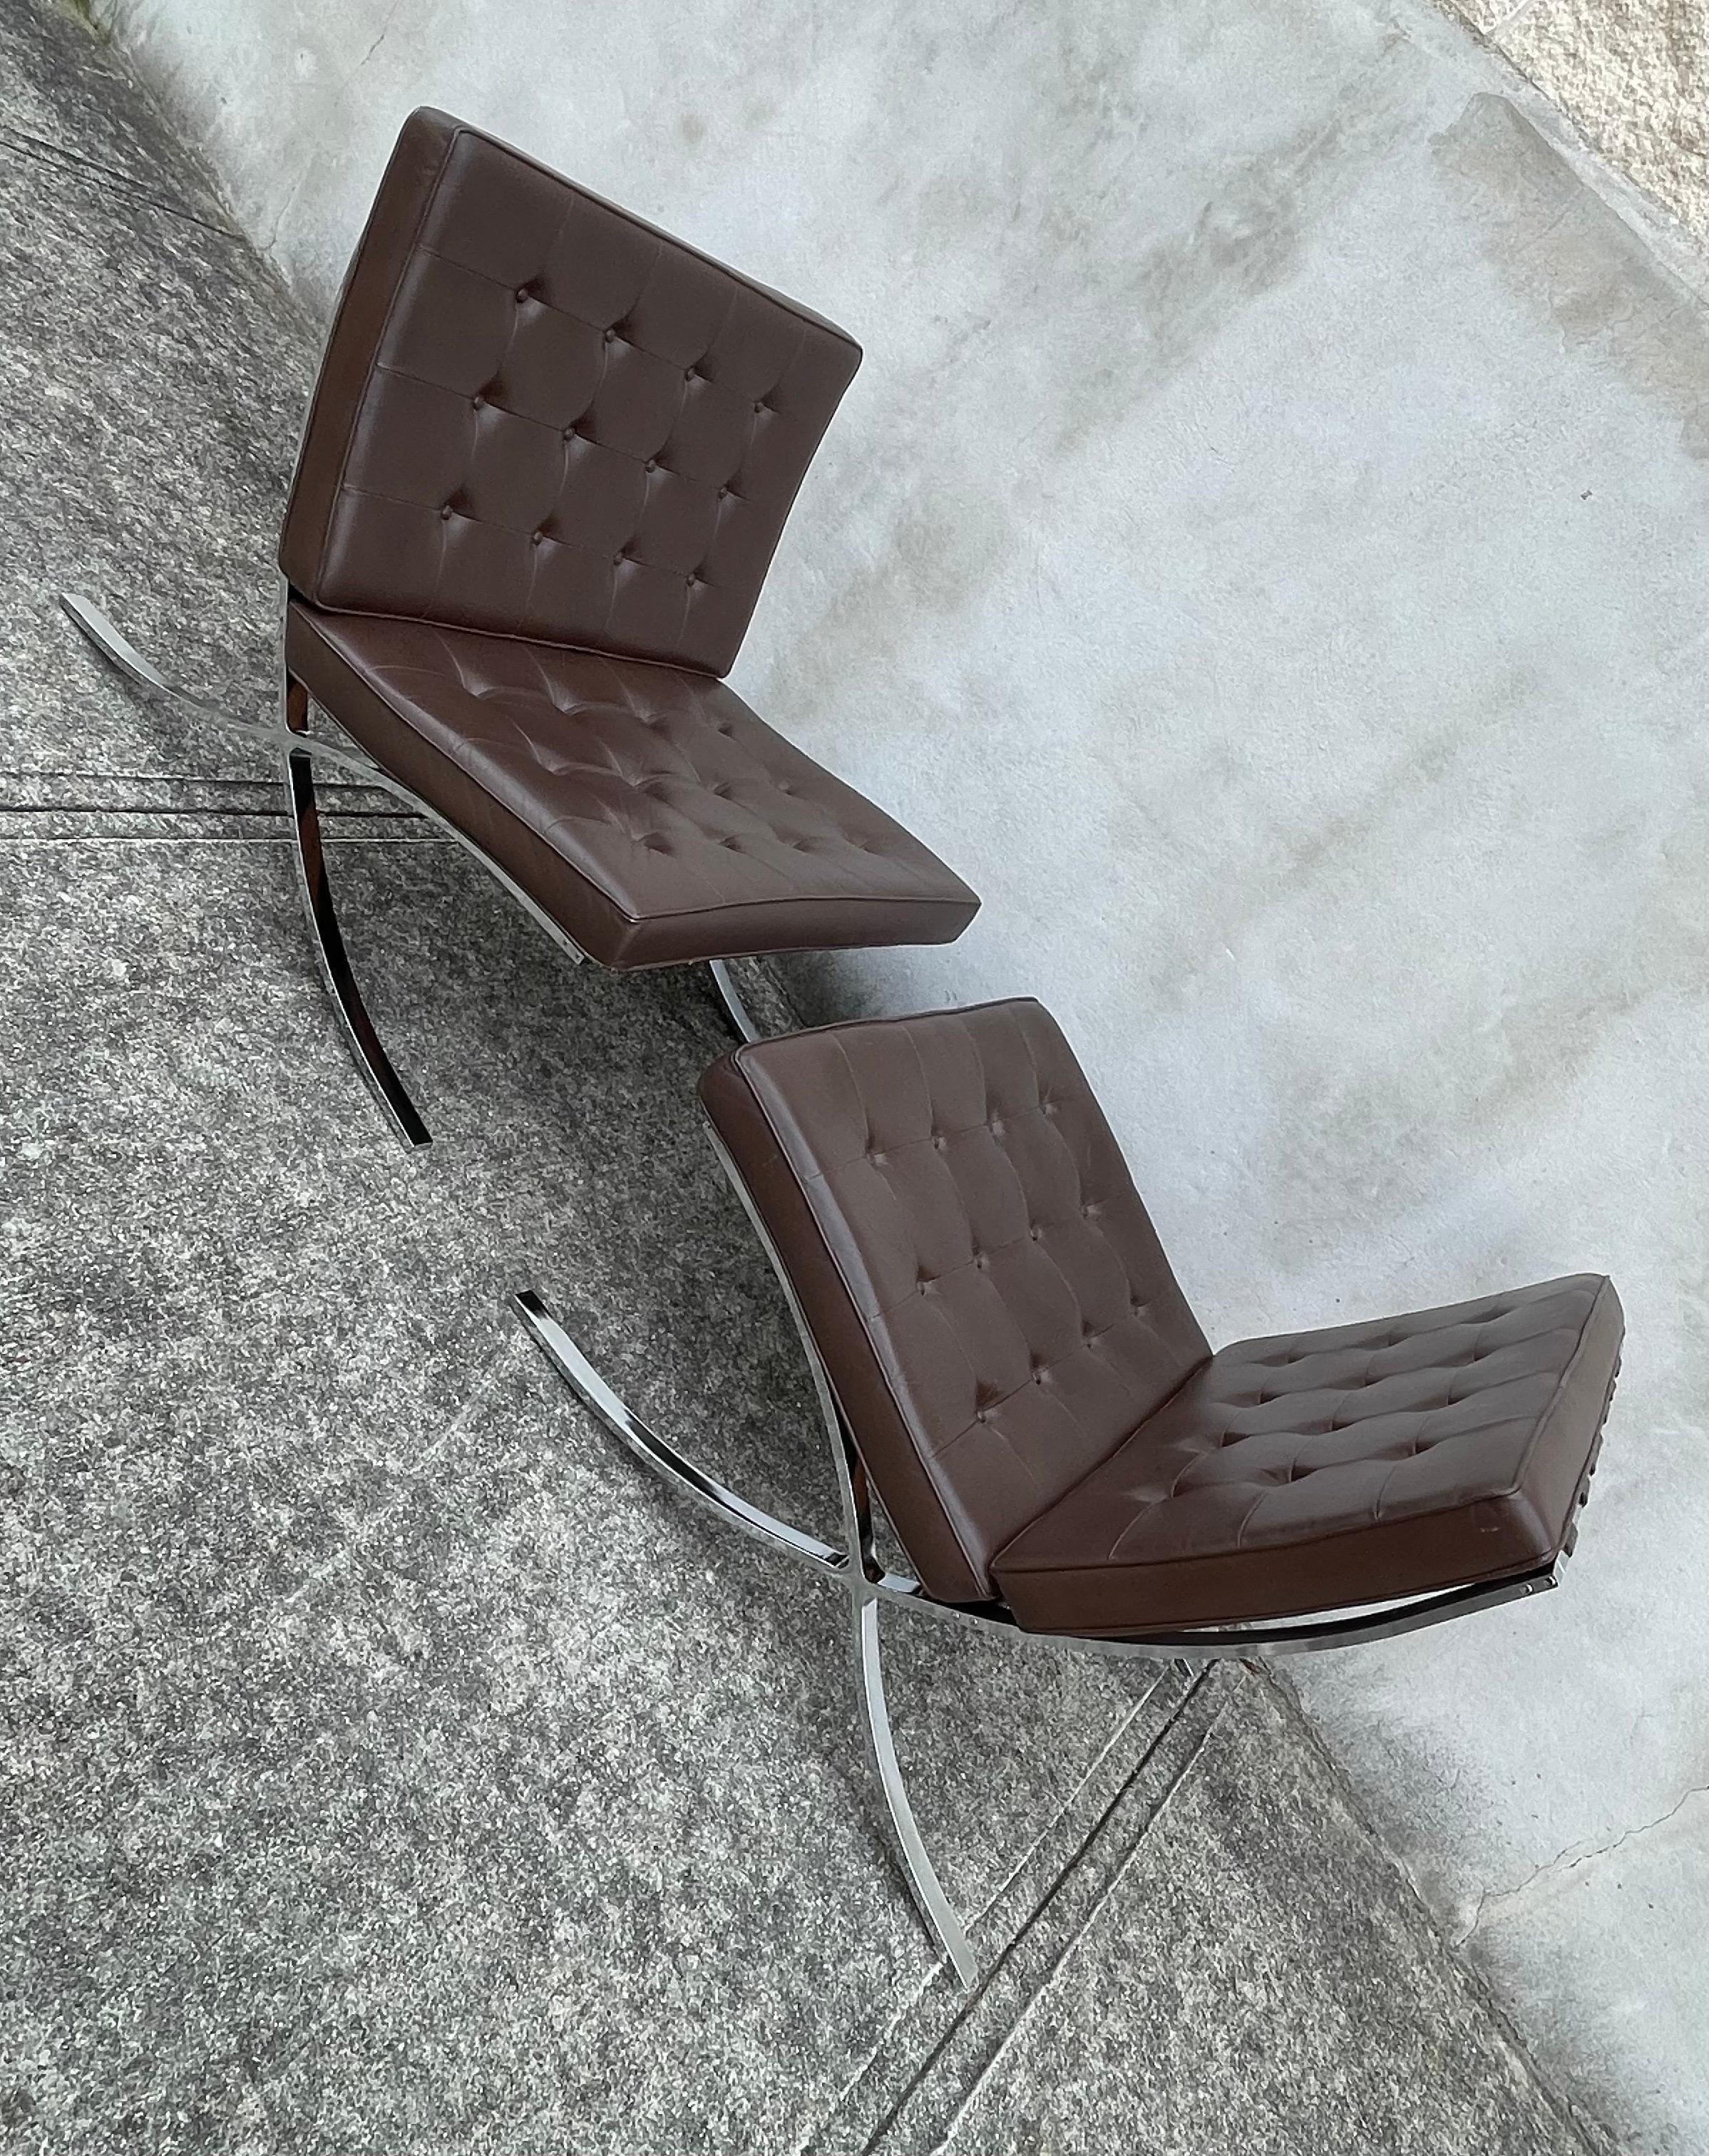 American Pair of Mid-Century Modern Barcelona Chairs in Brown Leather, 1970's Generation For Sale